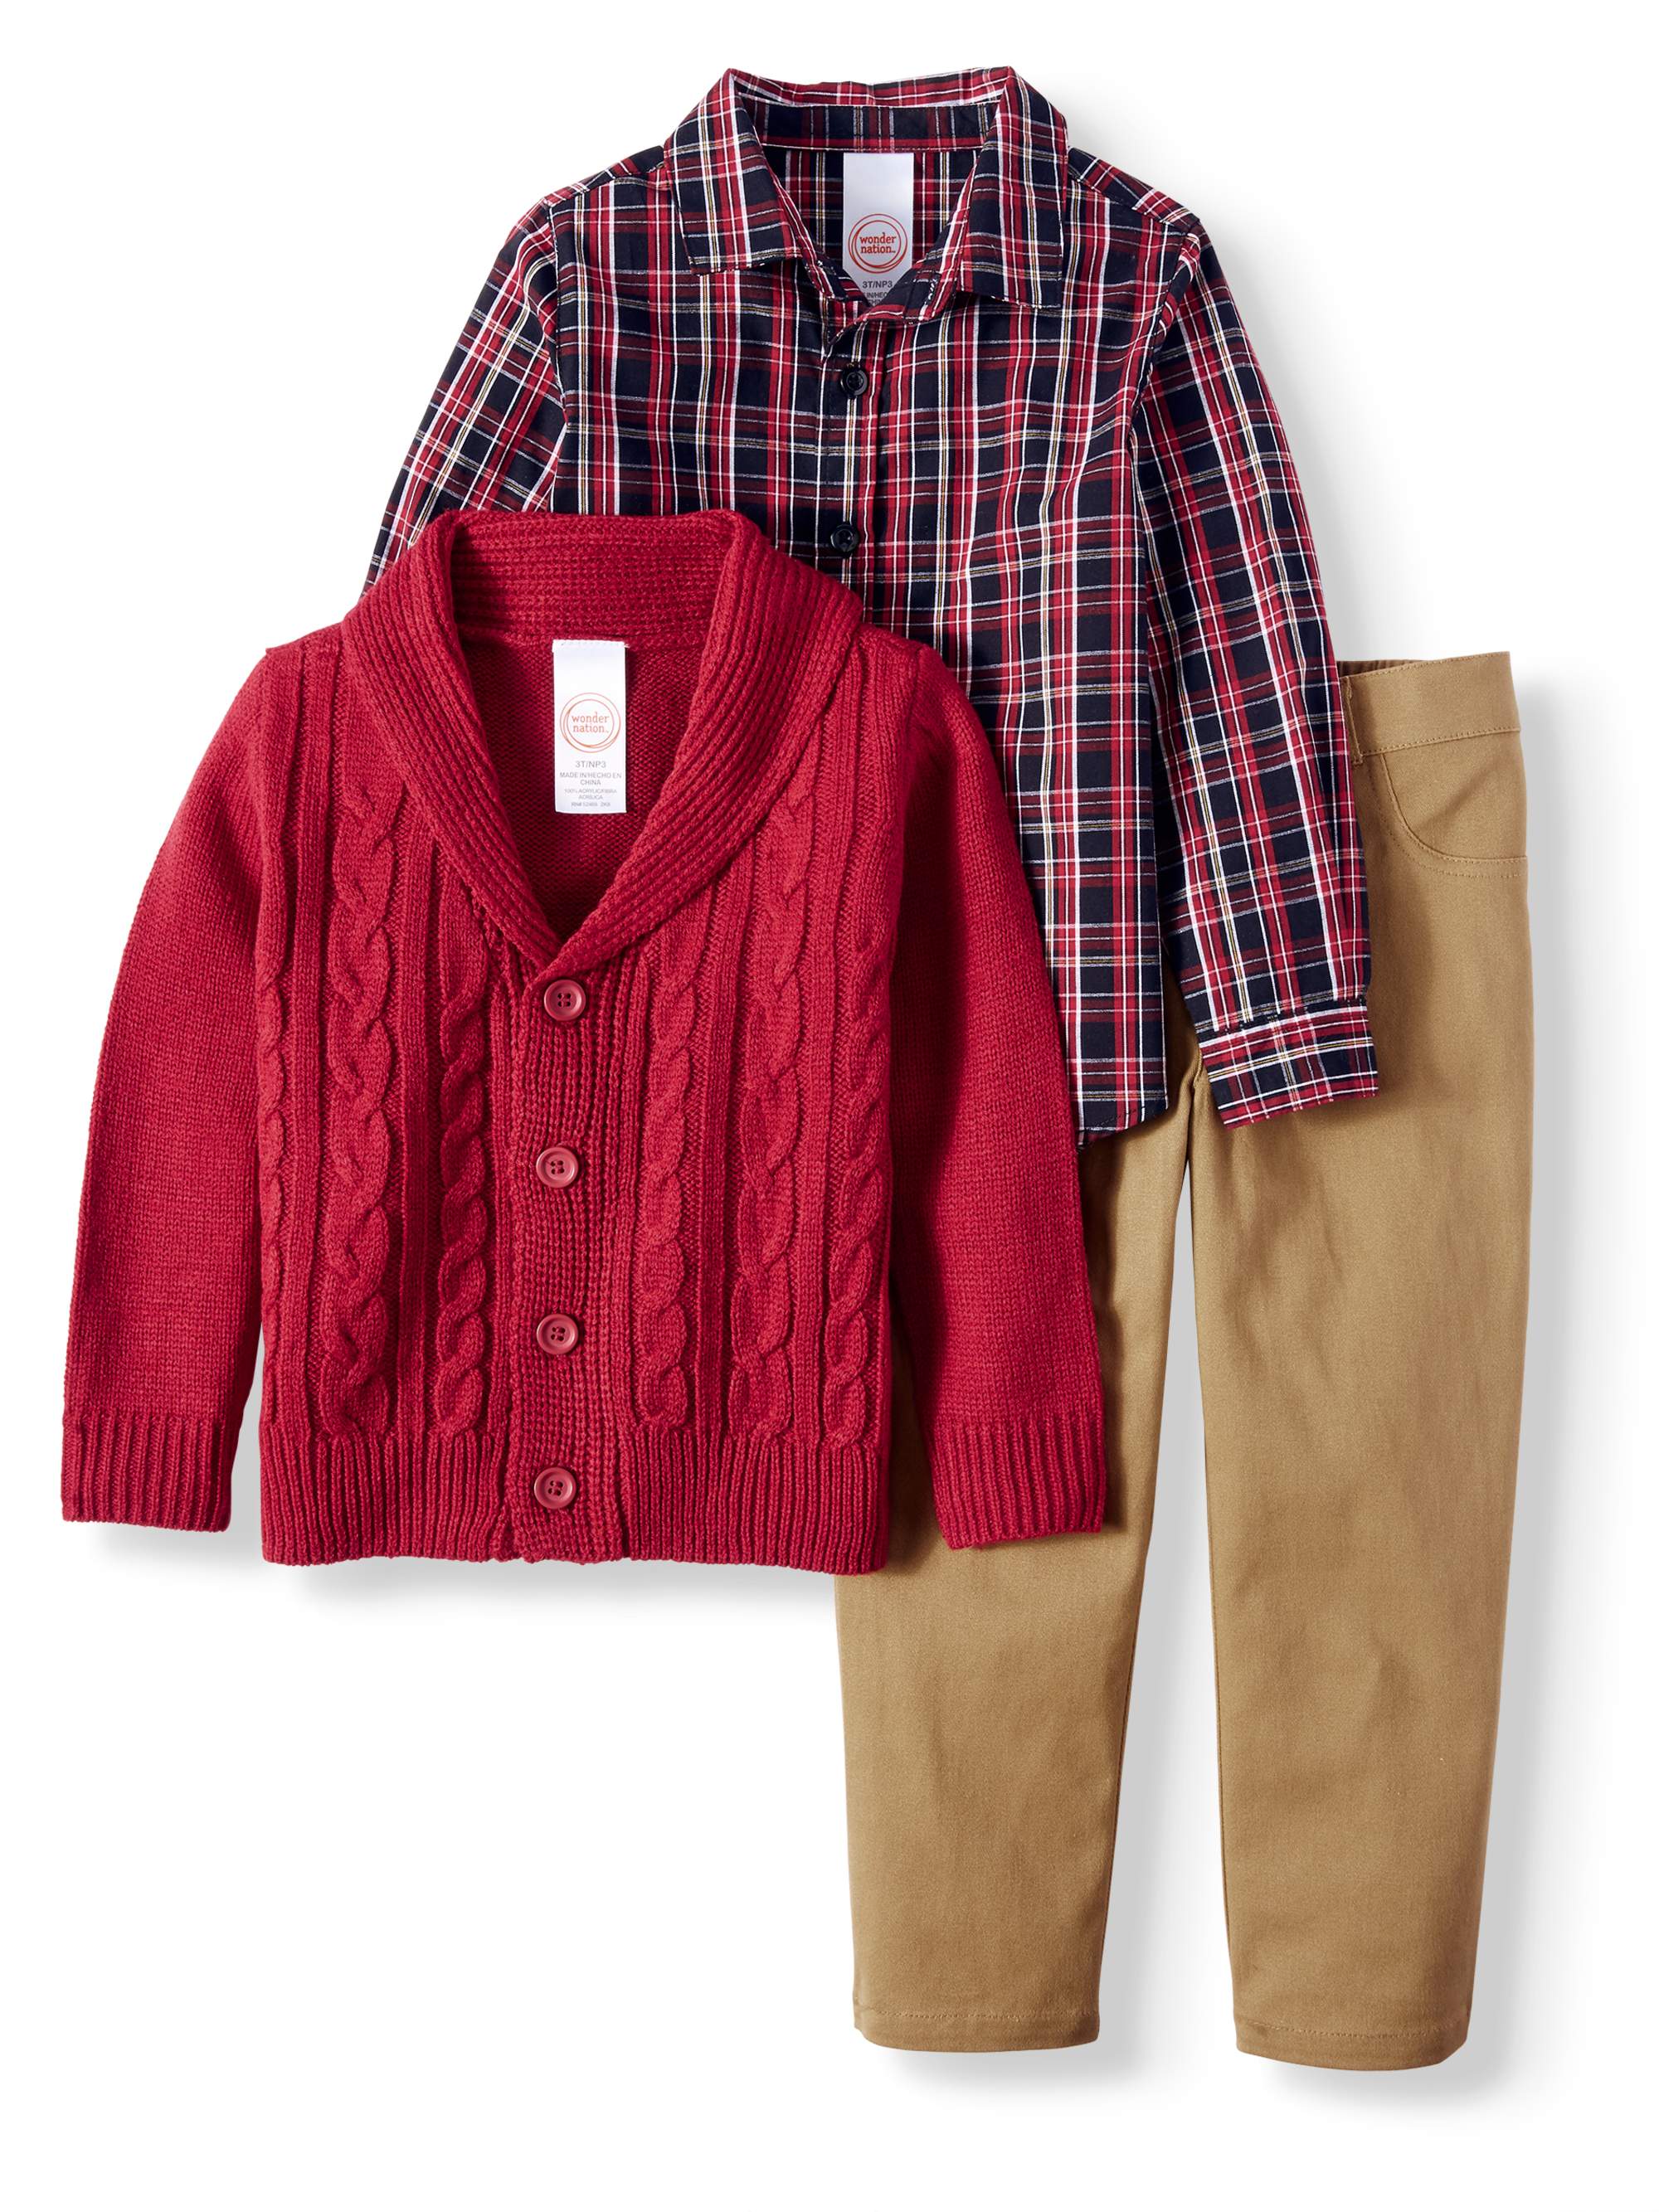 Cardigan Sweater, Woven Button-up Shirt & Twill Pants, 3pc Outfit Set - image 1 of 5